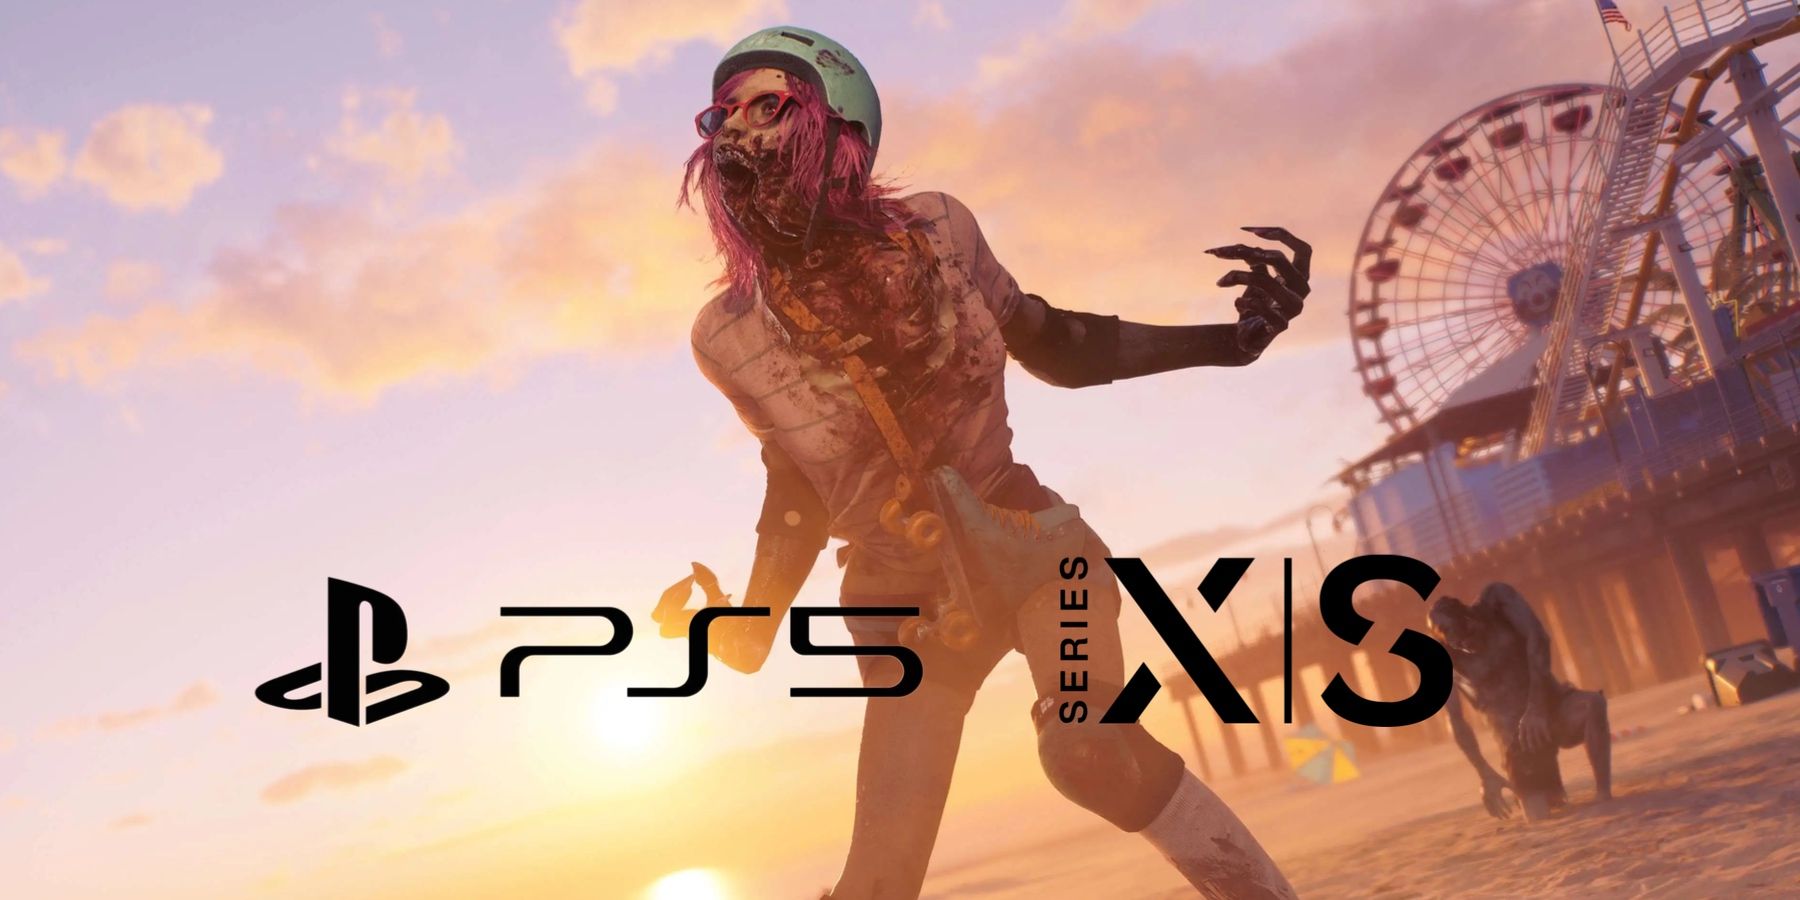 metacritic on X: With 98 critic reviews lodged so far, the Dead Island 2  Metascores are: [PS5 - 75]  [XSX - 74]   [PC - 73]  ..but its deep  melee